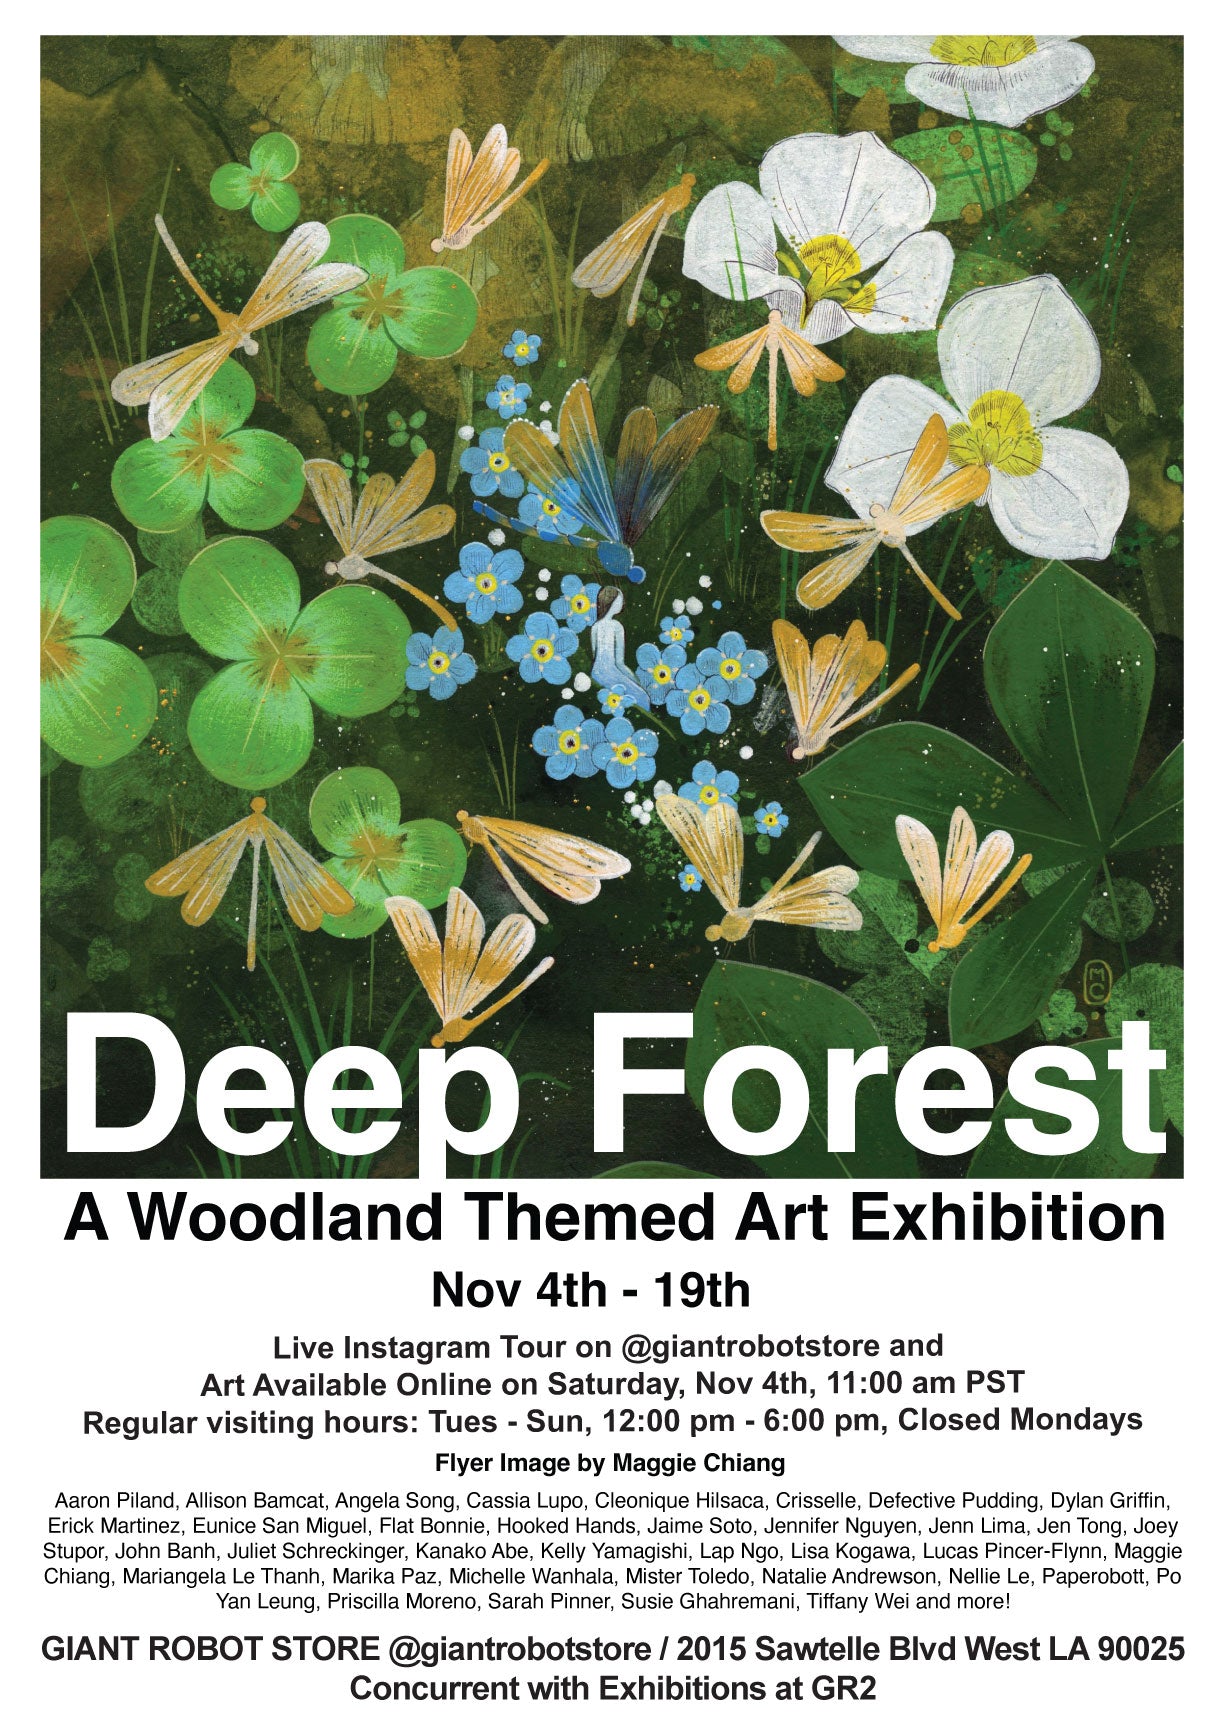 Art show poster for Deep Forest, a woodland themed art exhibition at Giant Robot Store.